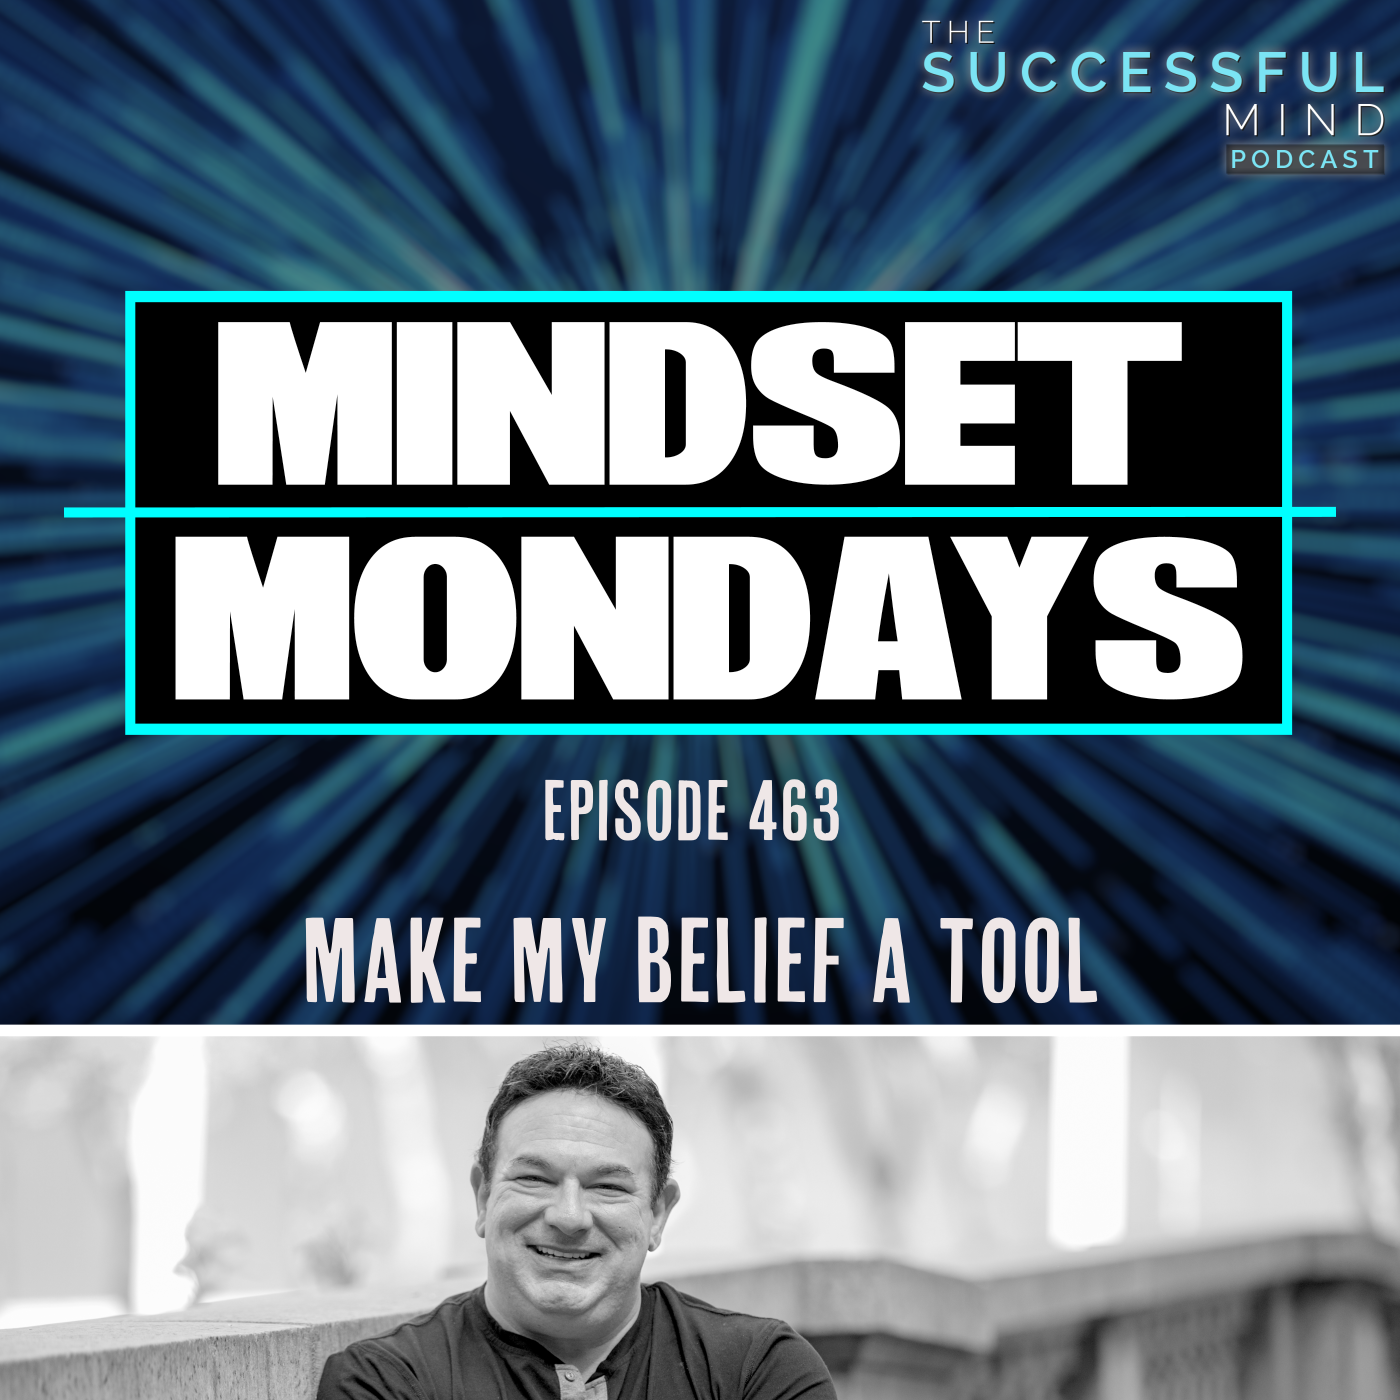 The Successful Mind Podcast - Episode 463 - Make My Belief a Tool